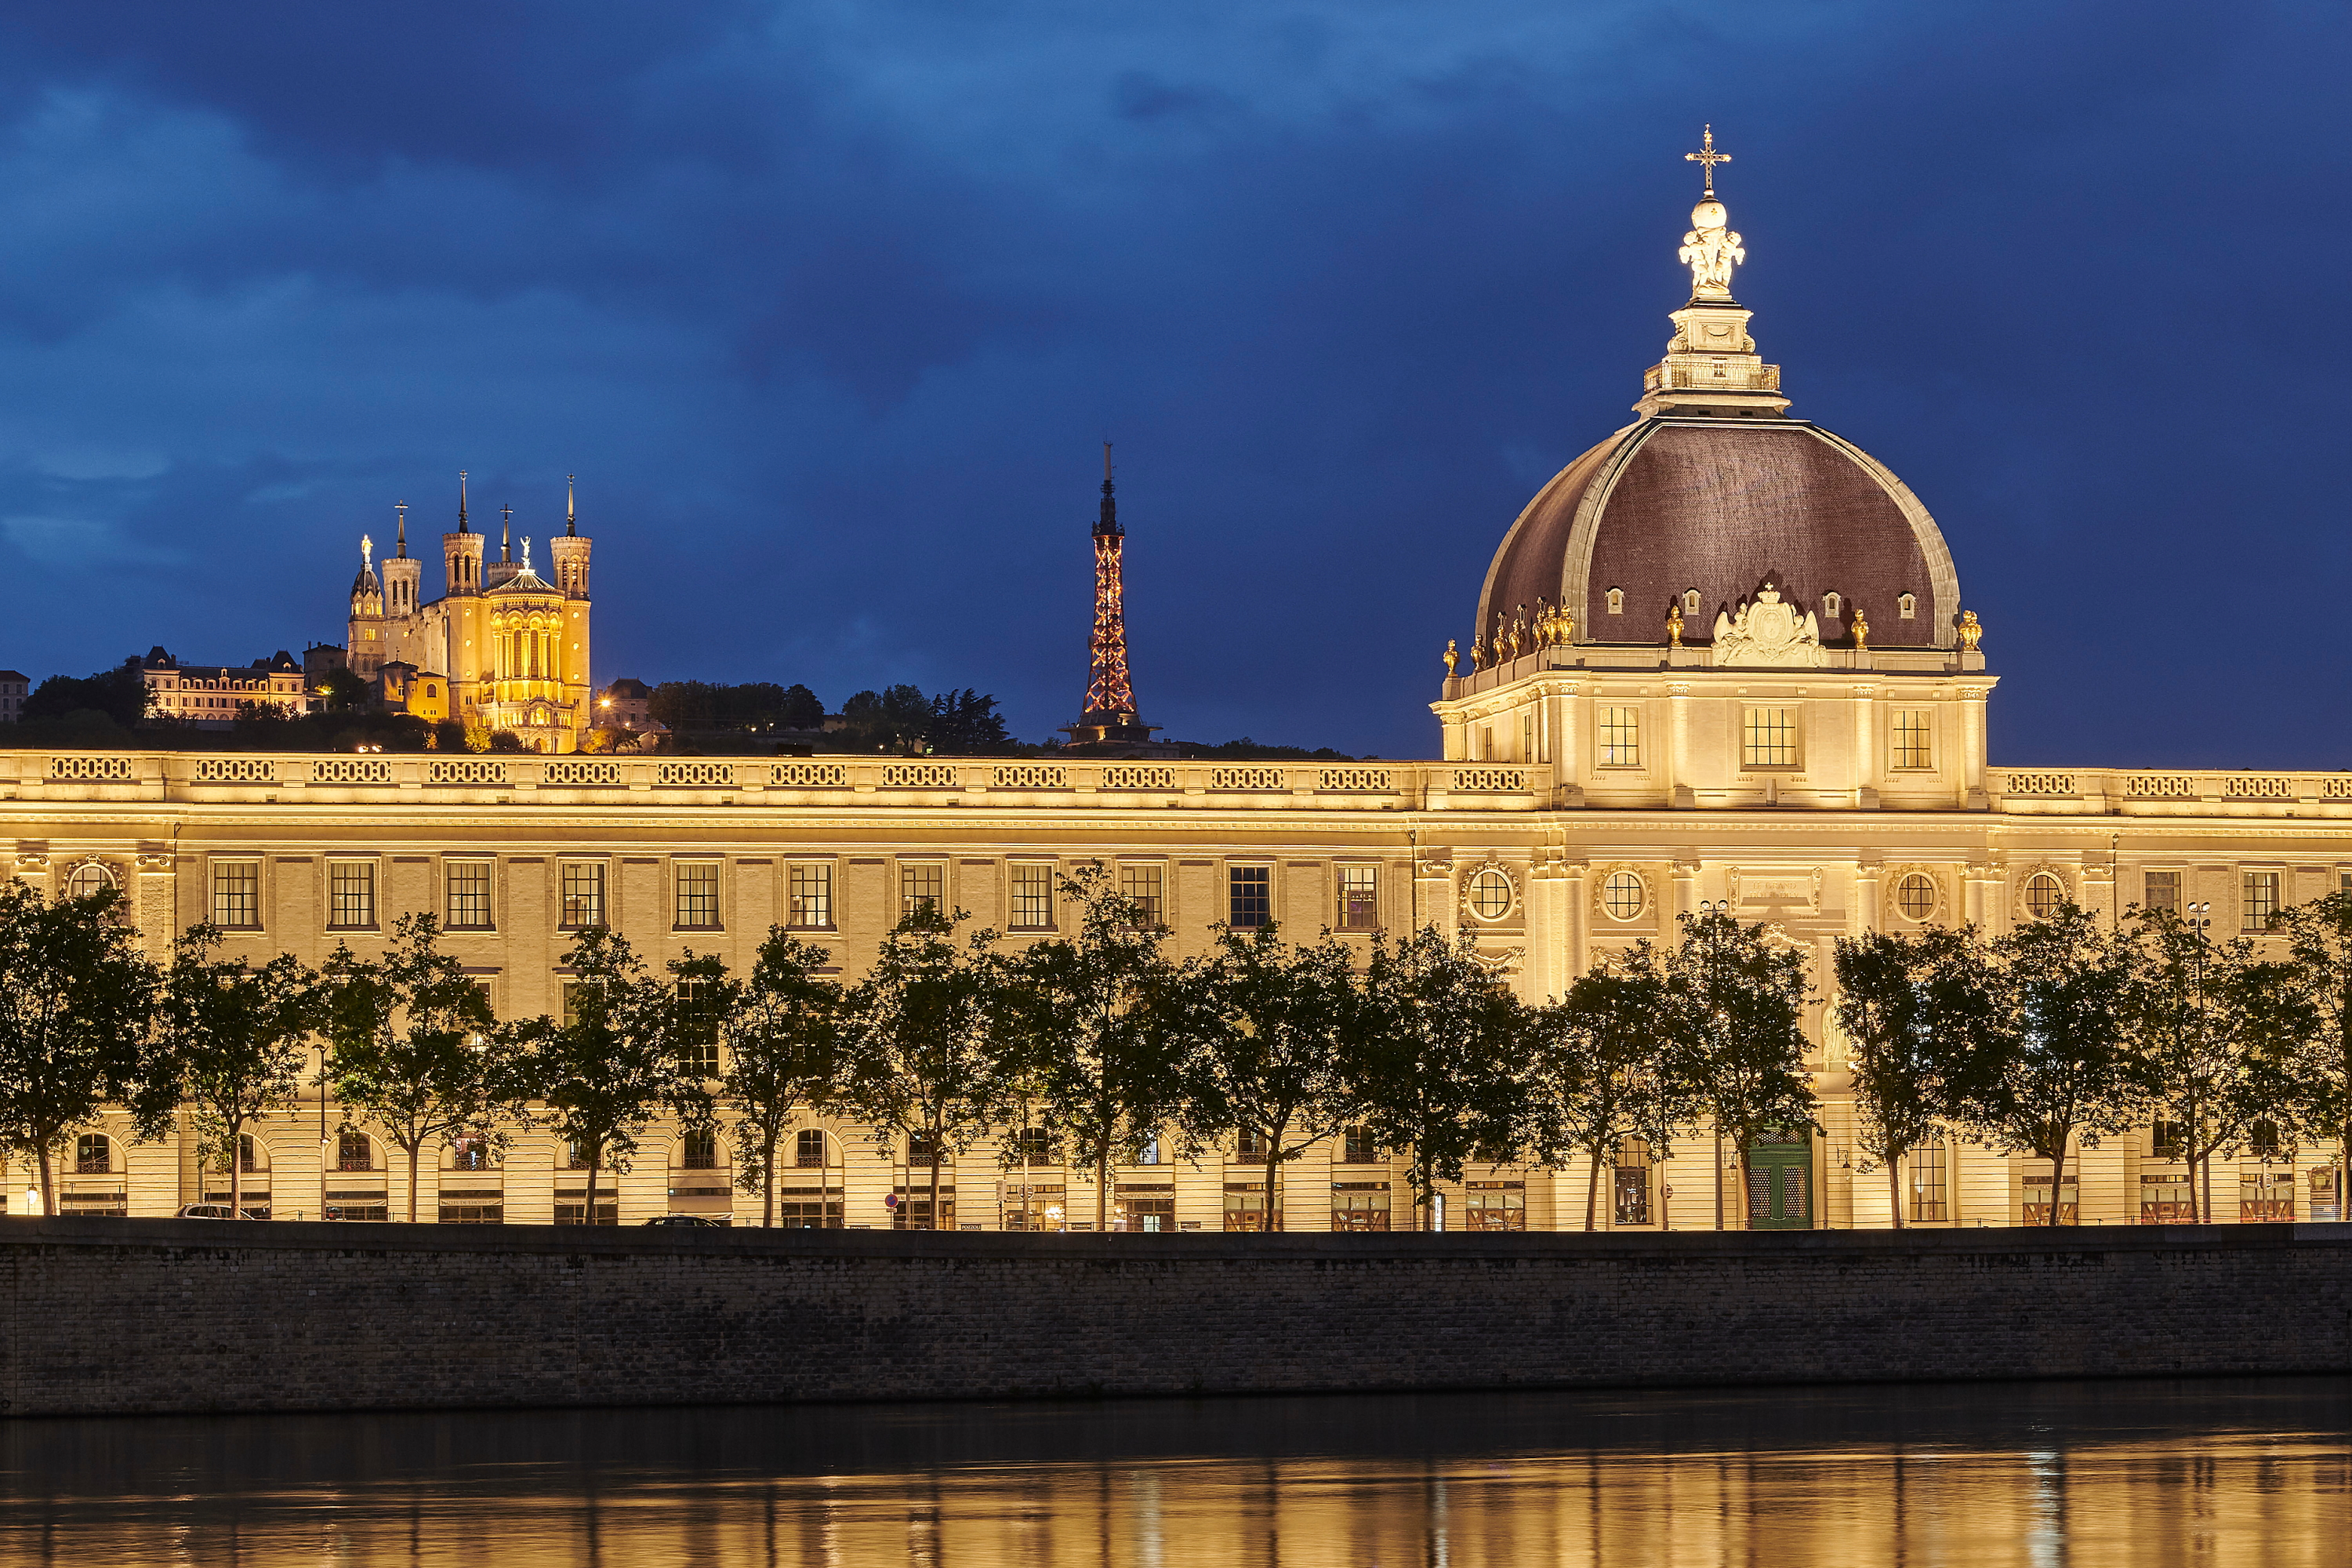 IHG has opened one of its most beautiful hotels, following an extensive four-year restoration of one of Lyon’s most iconic buildings. The renovation of the Grand Hôtel Dieu complex is the largest private transformation of an historic monument carried out in France to date. Click to enlarge.